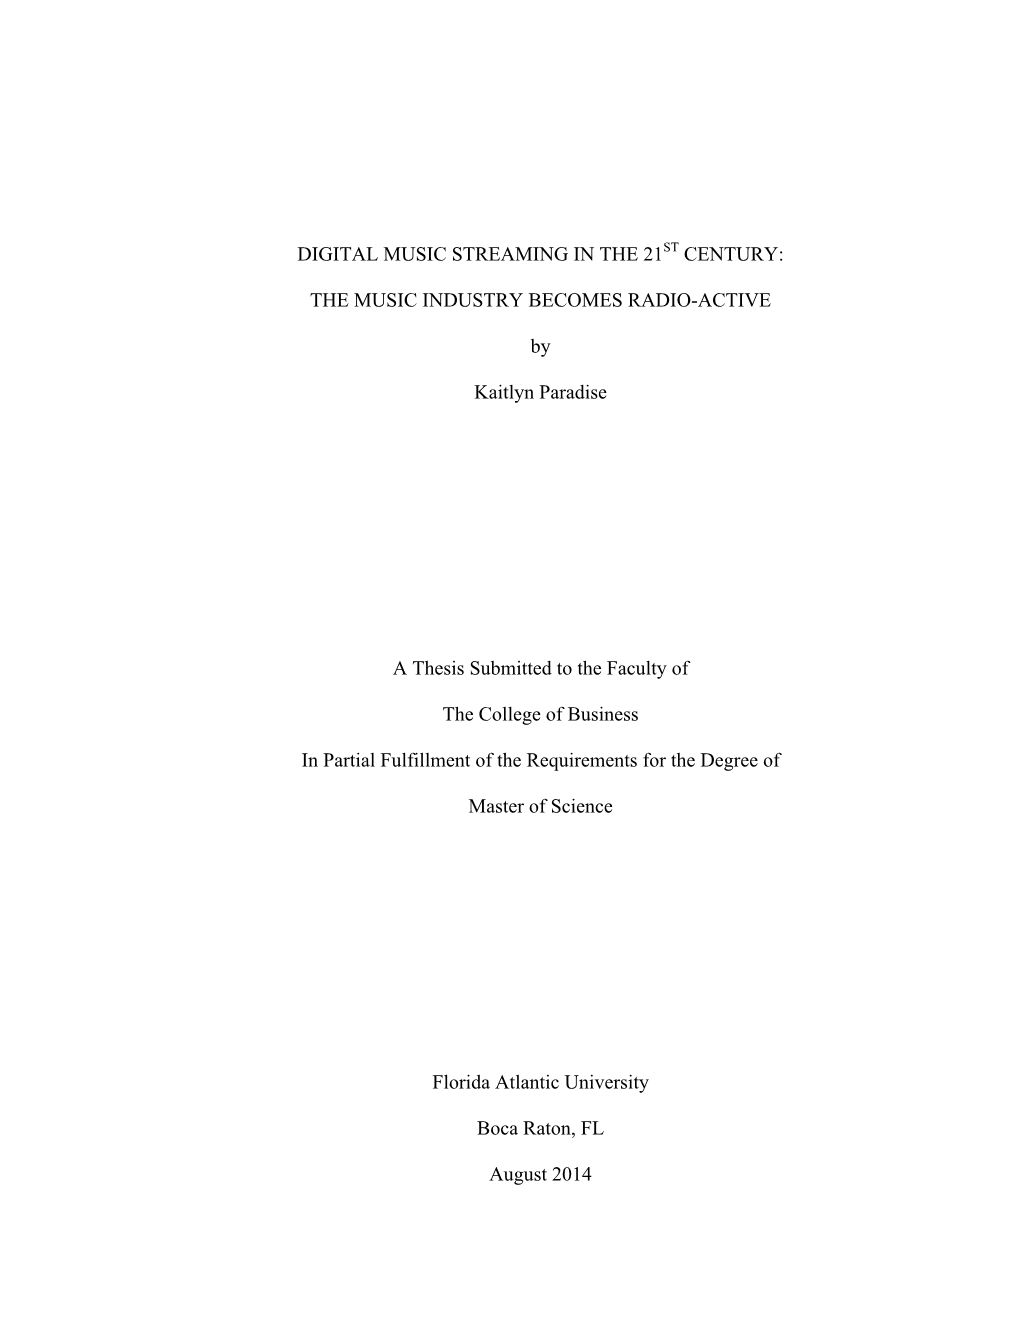 DIGITAL MUSIC STREAMING in the 21ST CENTURY: the MUSIC INDUSTRY BECOMES RADIO-ACTIVE by Kaitlyn Paradise a Thesis Submitted to T